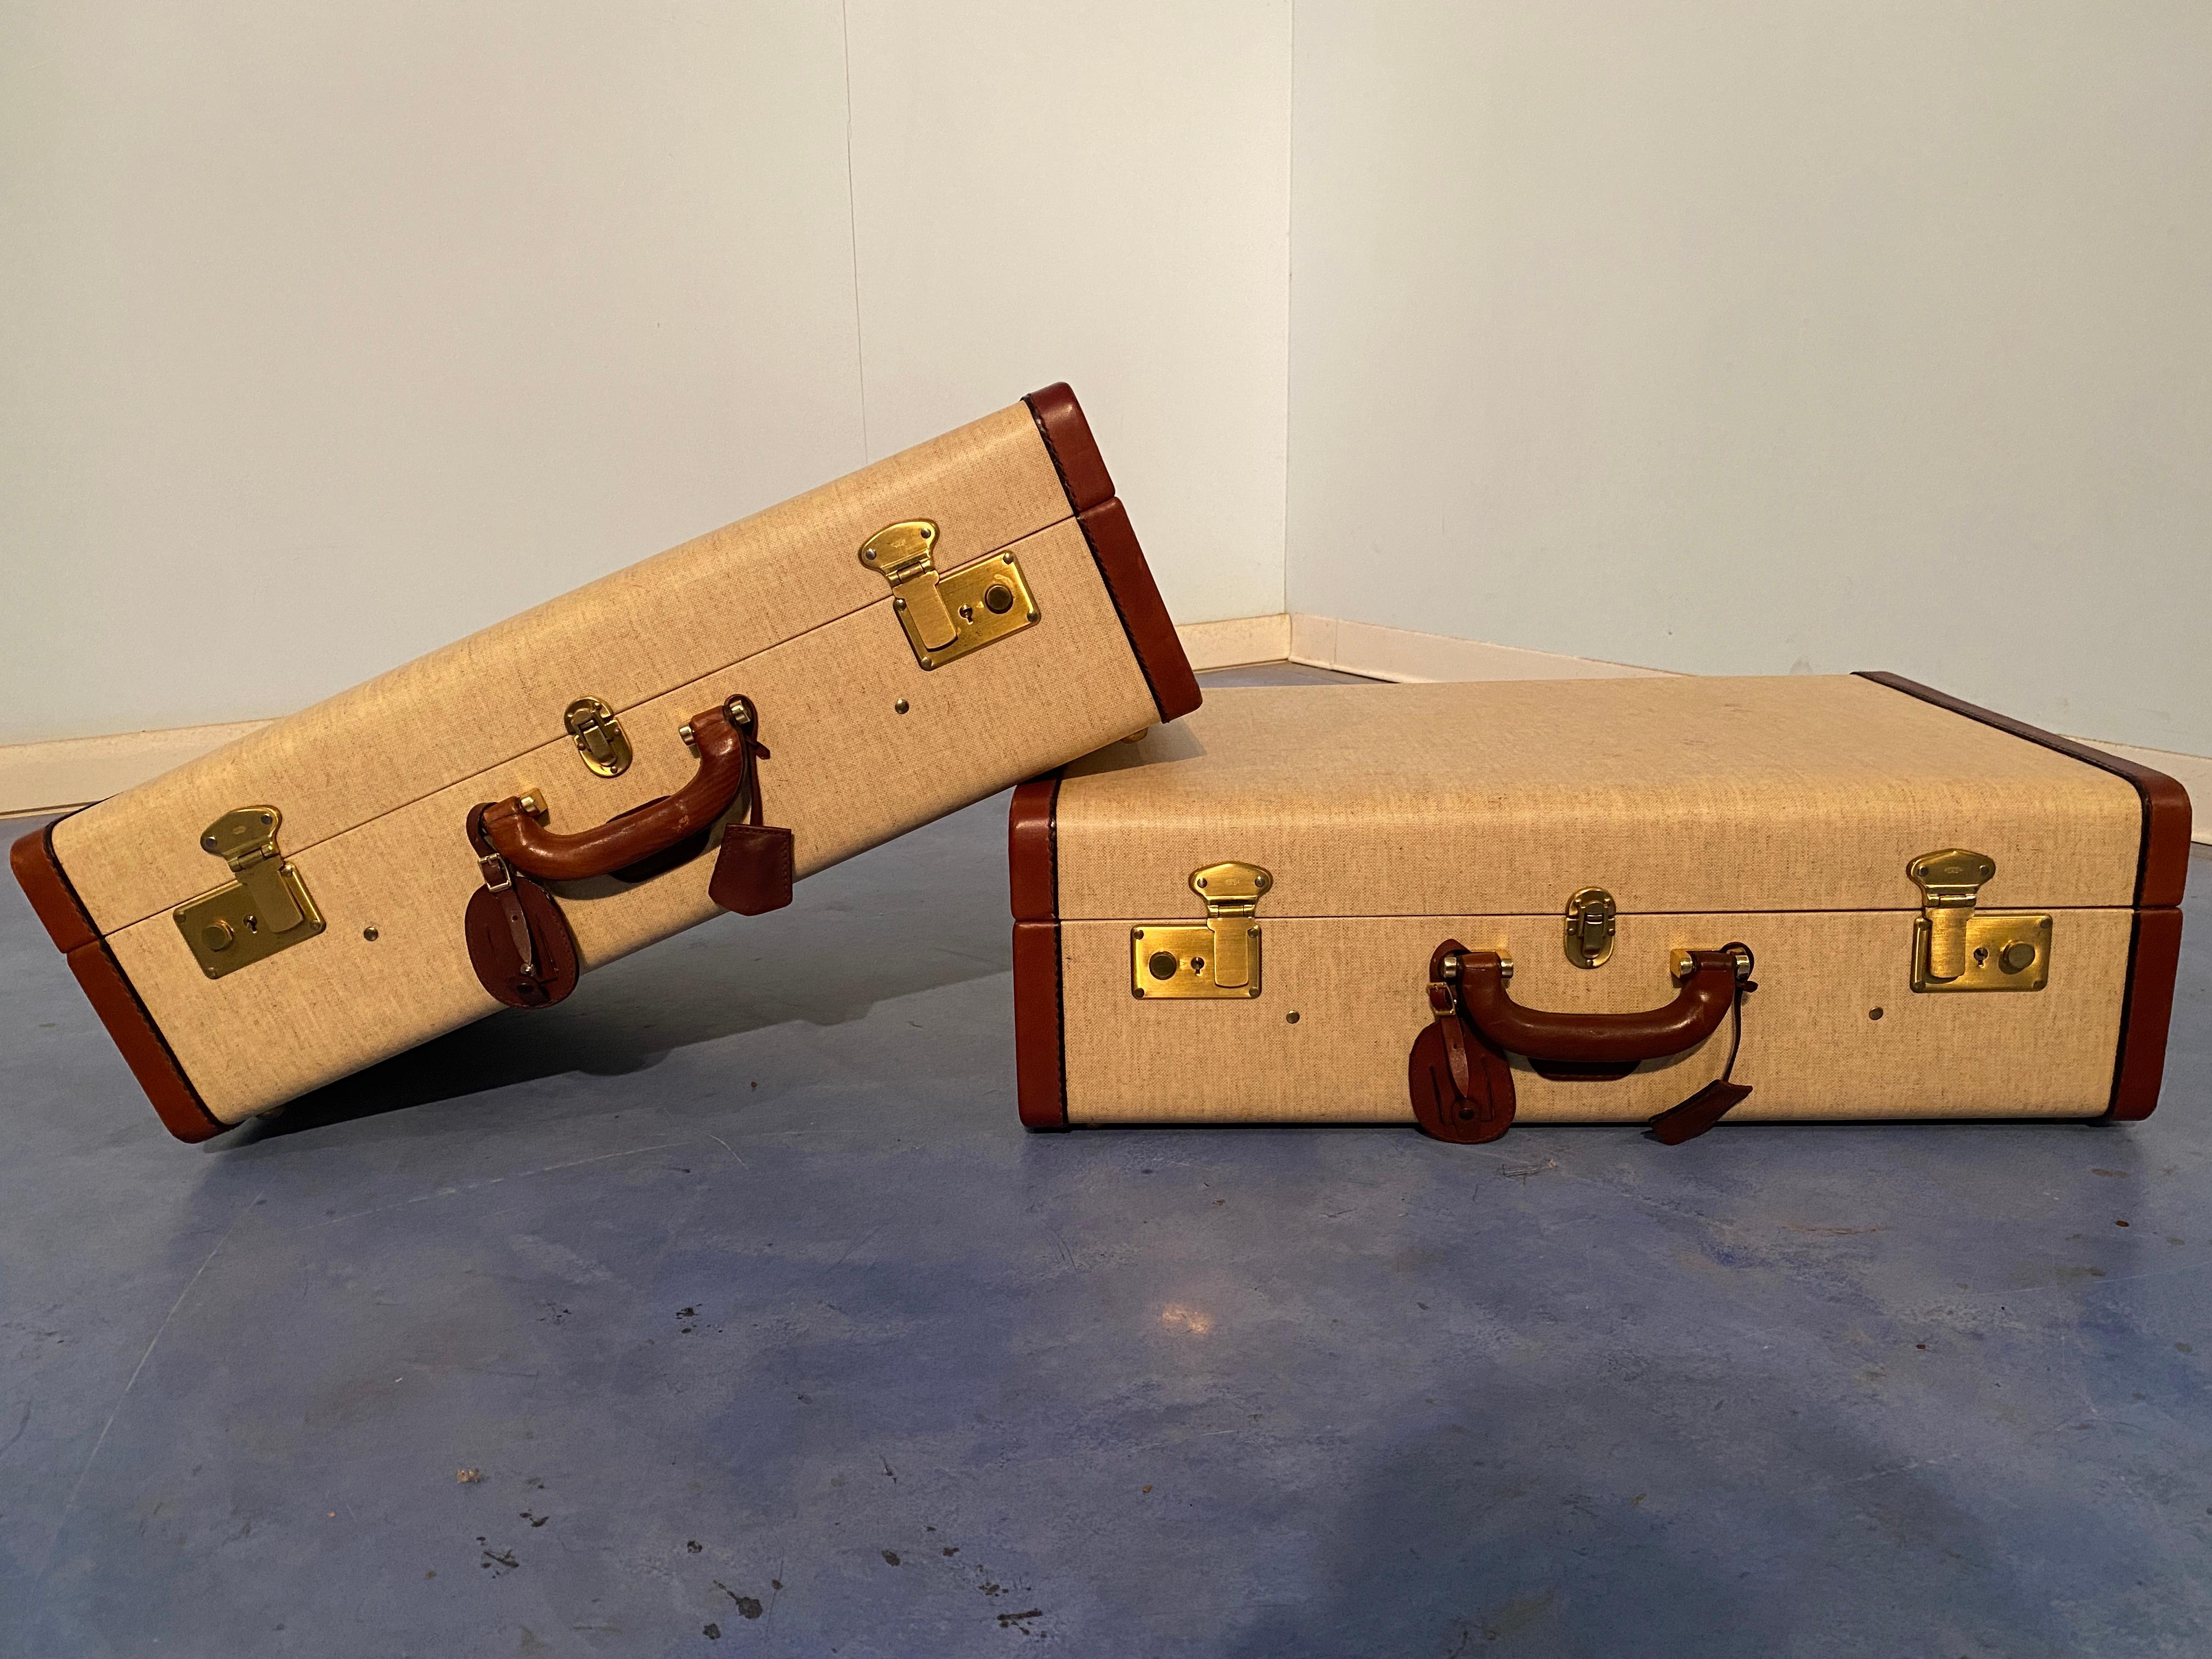 Set of two Italian suitcases from the 1960s, very valuable as a collector's item or for furniture, and still functional today. Both suitcases are in good condition. The locks are original and work with their authentic keys. Leather is finished with